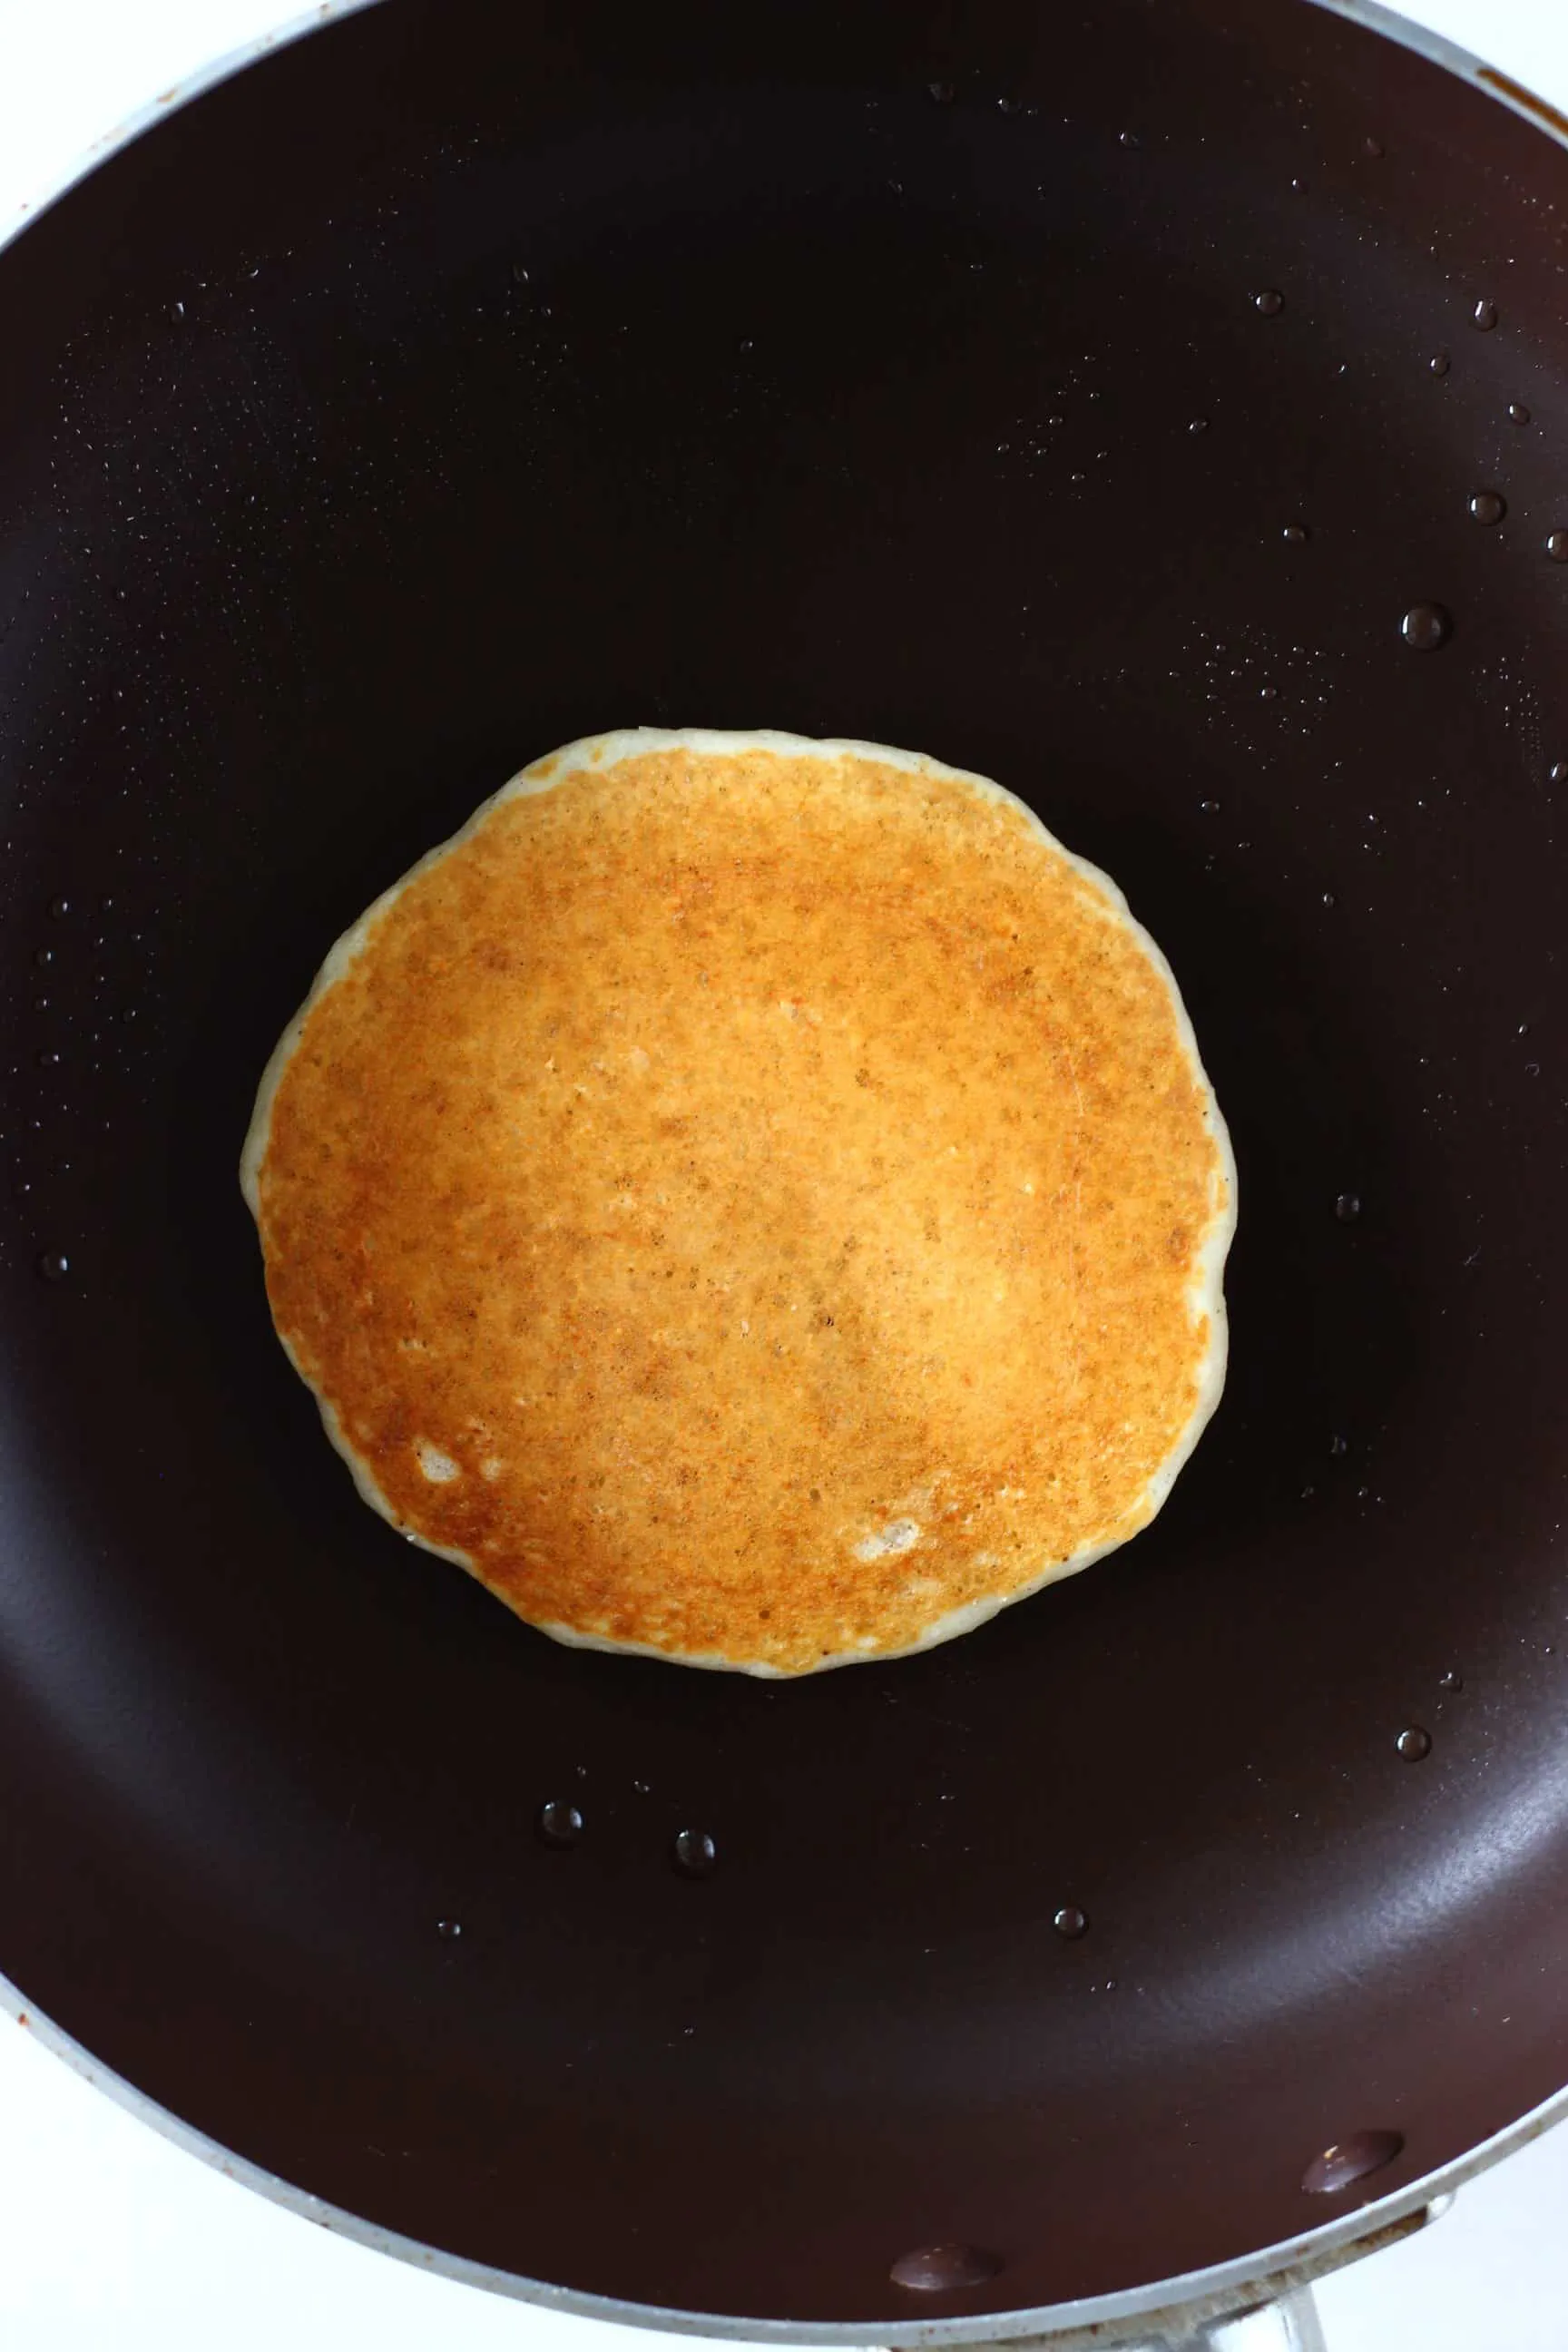 A golden brown gluten-free vegan oatmeal pancake being cooked in a frying pan 